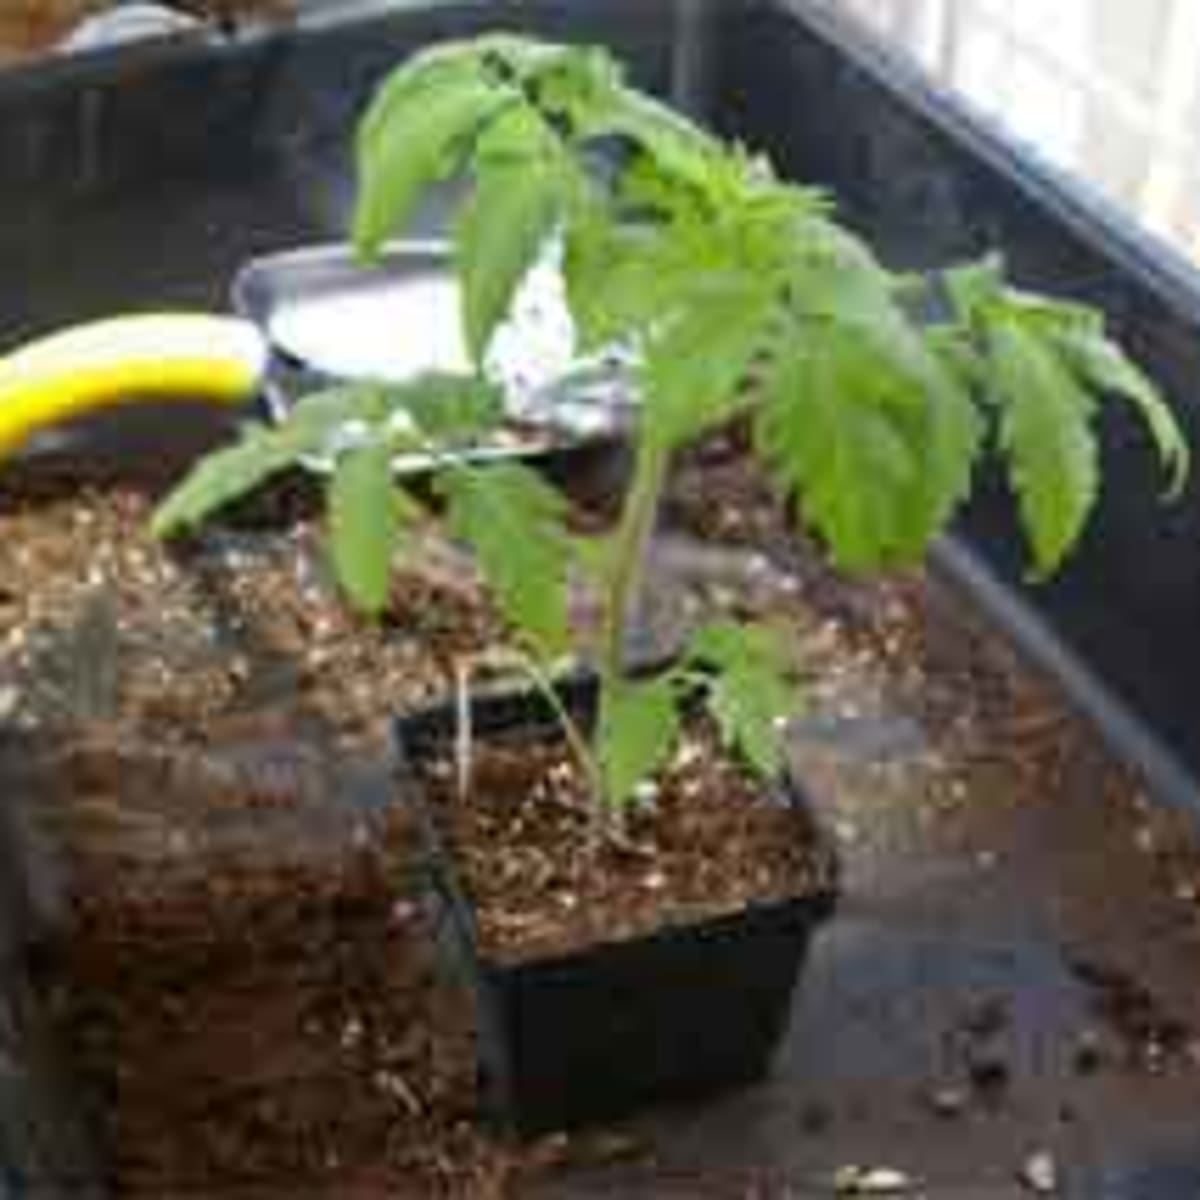 How to Get Thick Stems on Tomato Plants